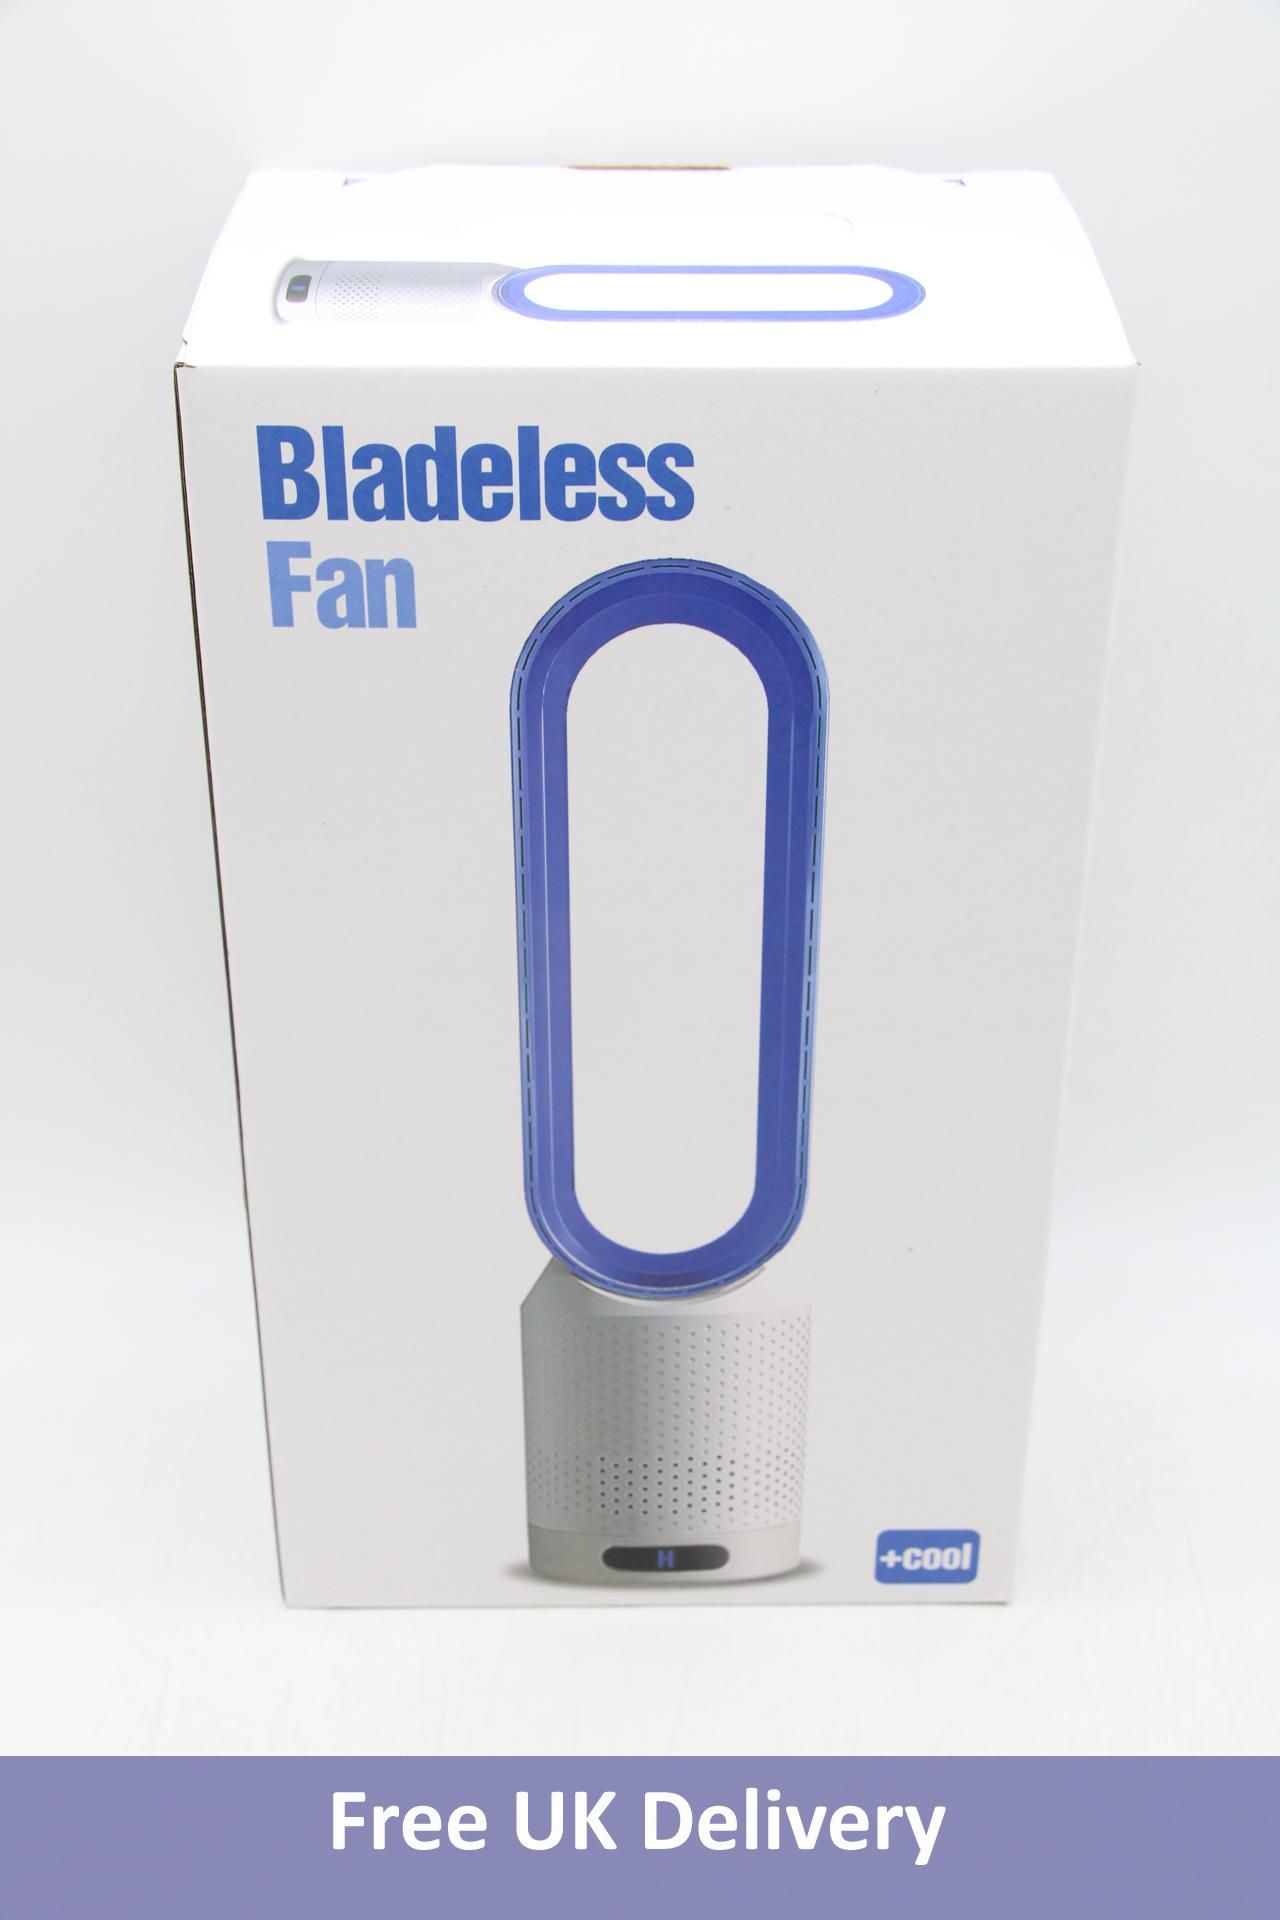 Three Cool Bladeless Fans, White - Image 3 of 3